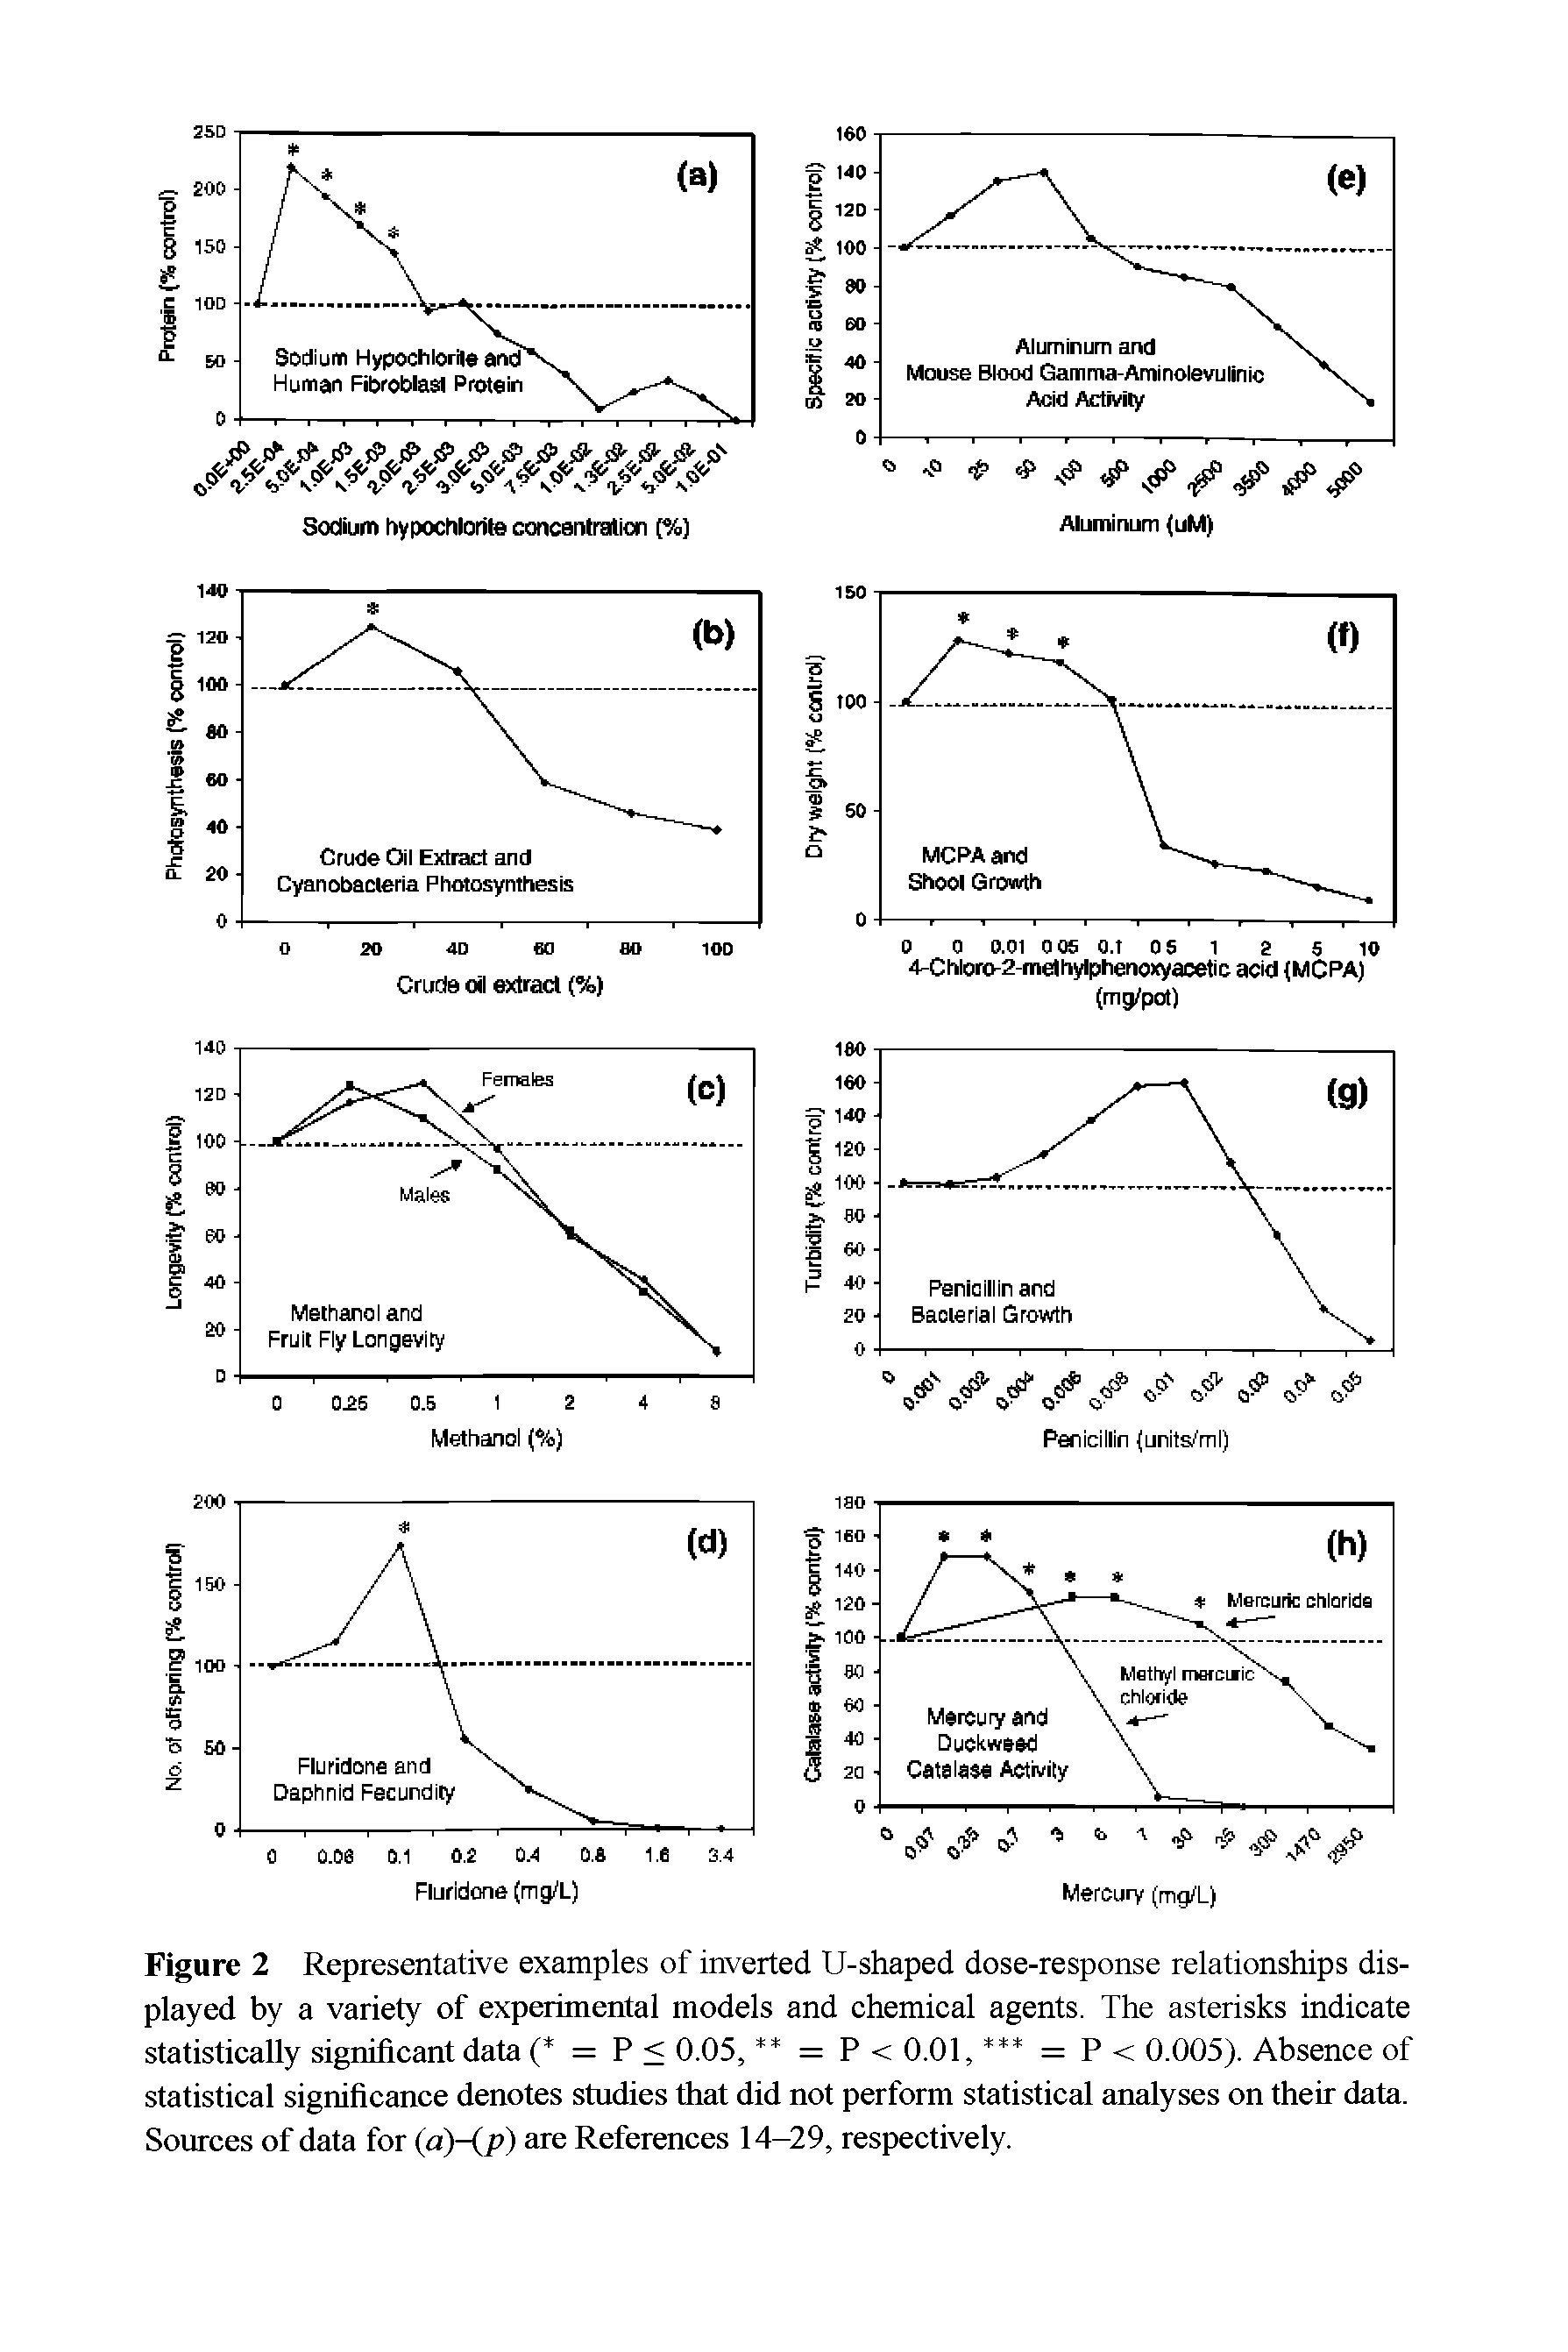 Figure 2 Representative examples of inverted U-shaped dose-response relationships displayed by a variety of experimental models and chemical agents. The asterisks indicate statistically significant data ( = P < 0.05, = P < 0.01, = P < 0.005). Absence of statistical significance denotes studies that did not perform statistical analyses on their data. Sources of data for (a)-(p) are References 14-29, respectively.